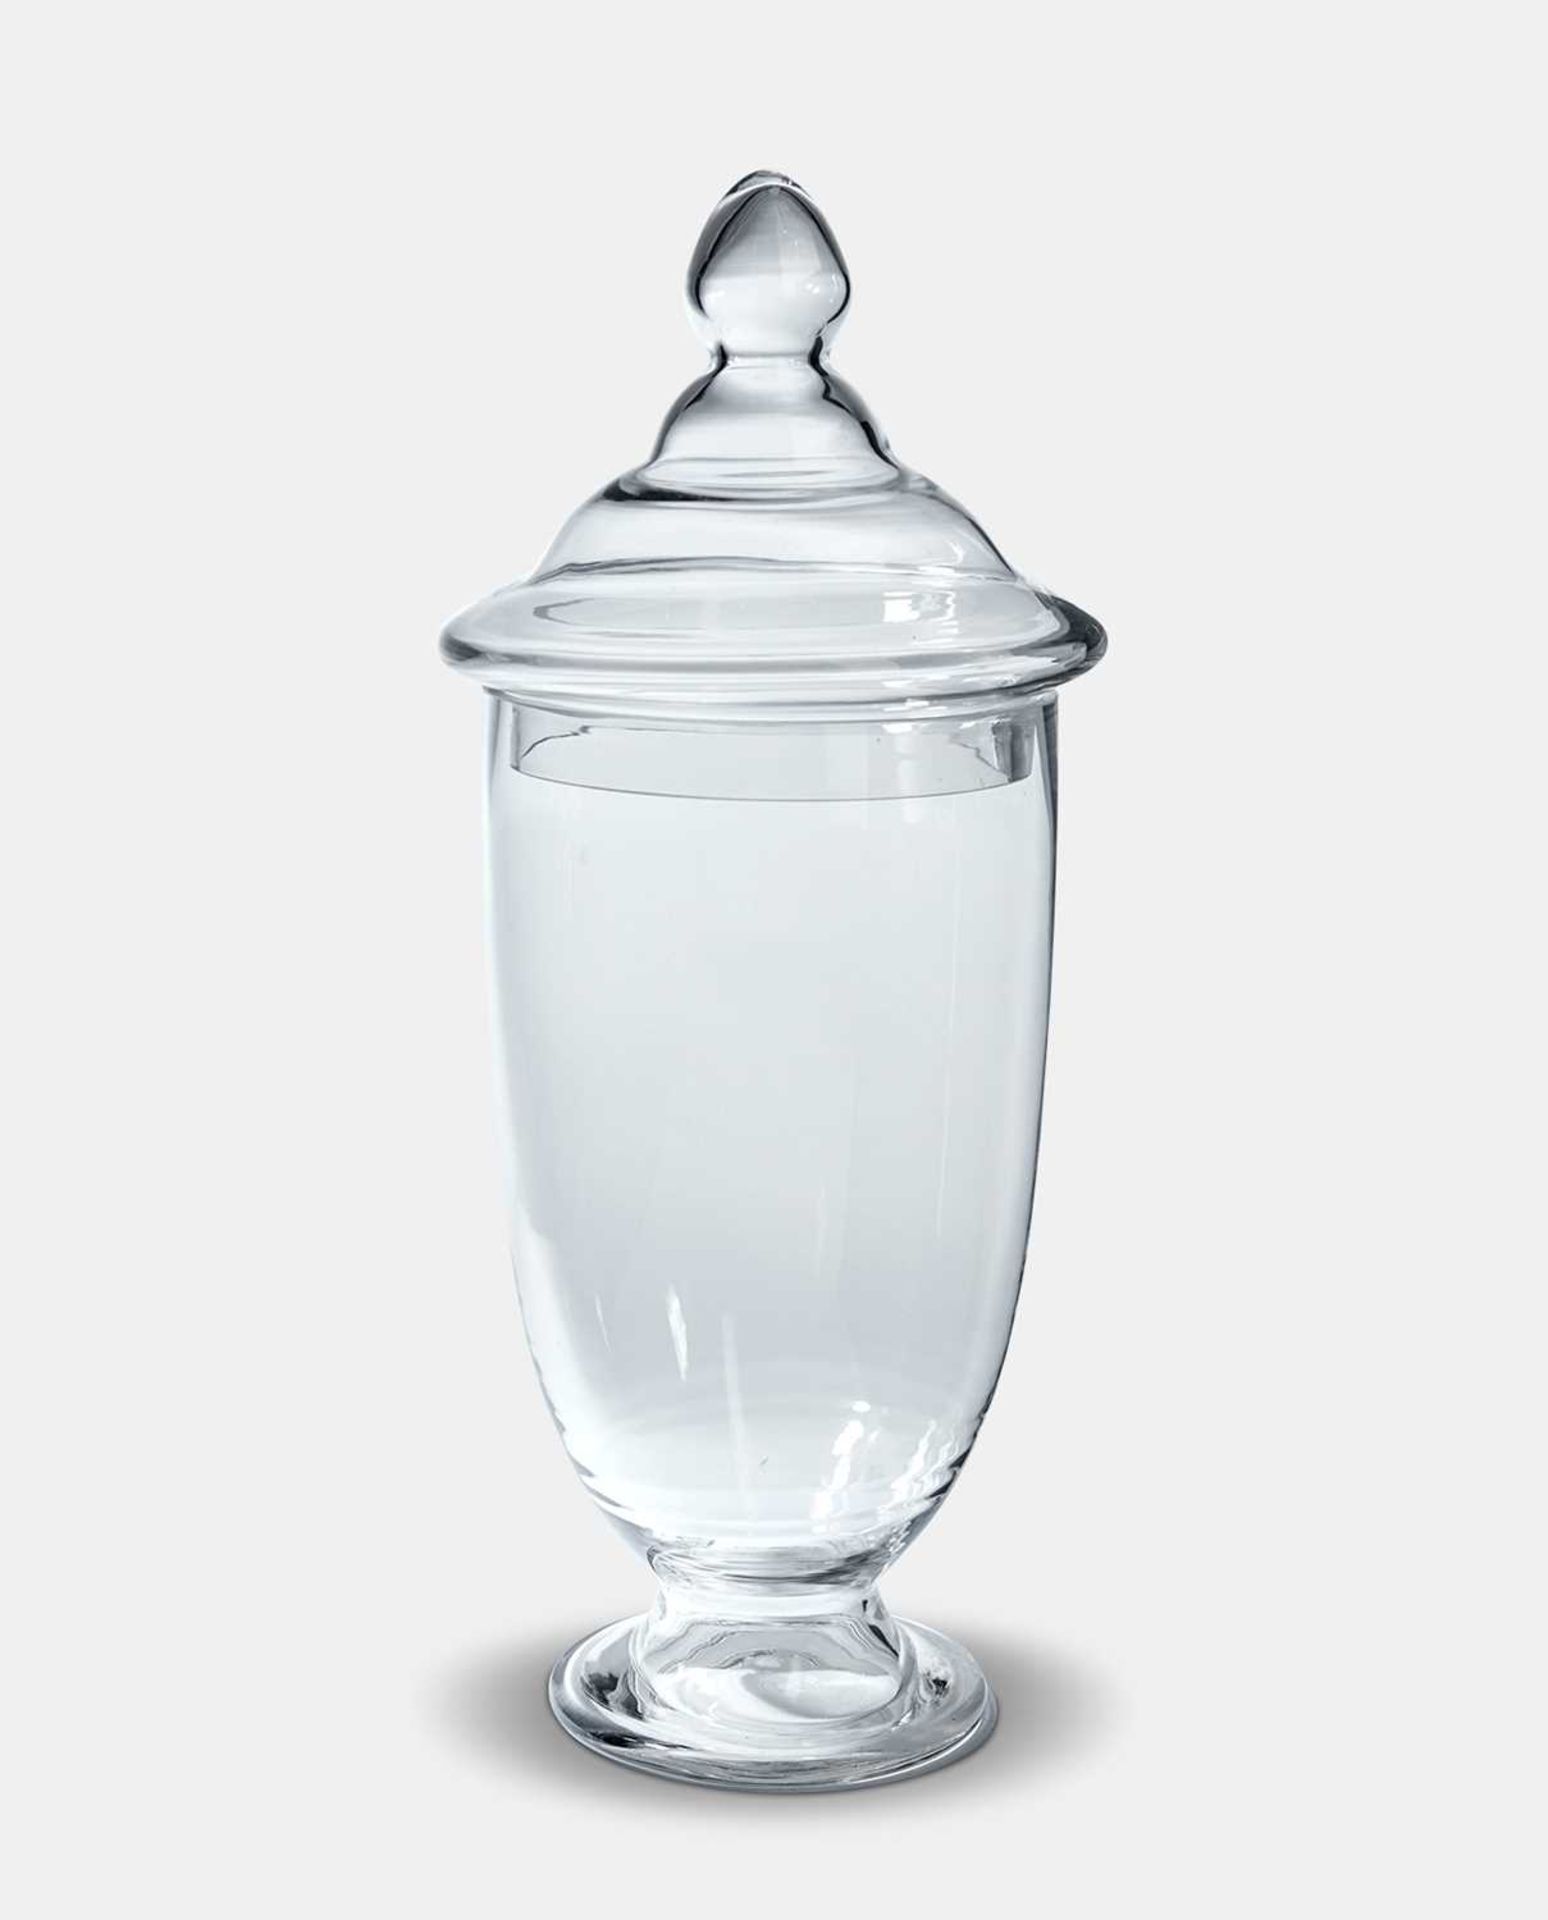 +VAT Pallet of 6 Cartons of 2, (a total of 12) No60 21 x 60cm Glass Apothecary Jar - 180102